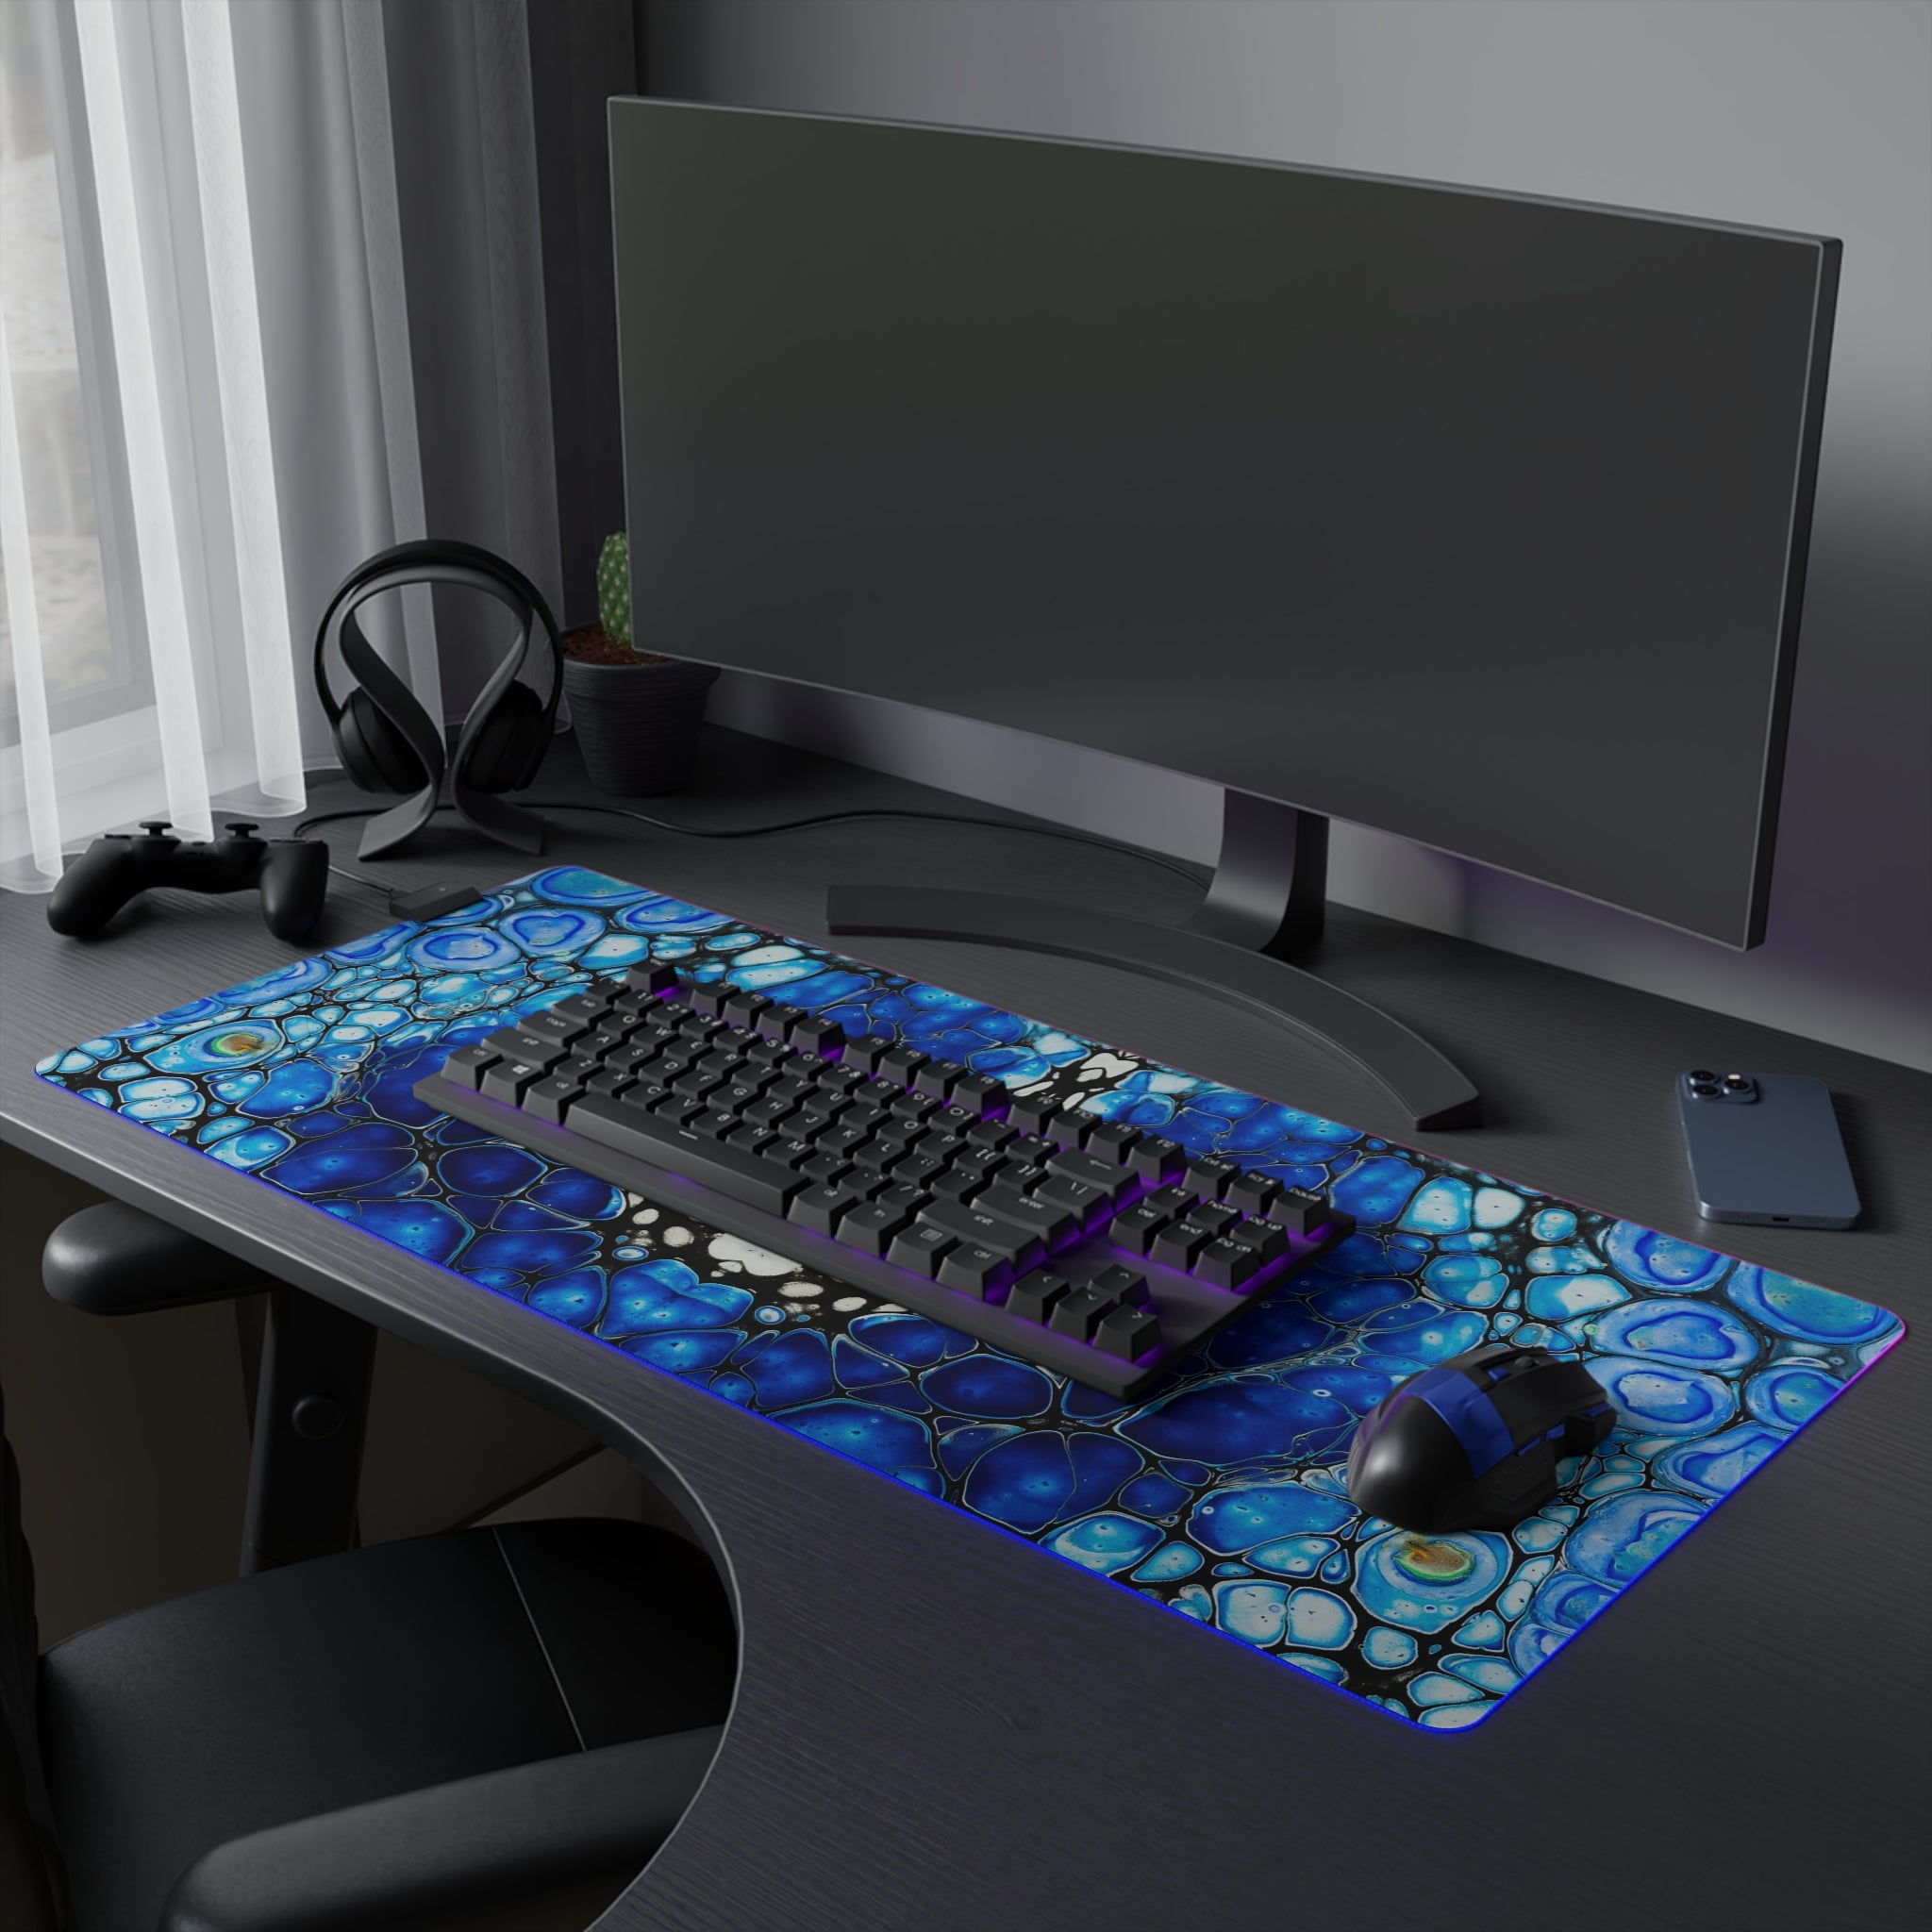 Cameron Creations - LED Gaming Mouse Pad - Cellonious B - Concept 1